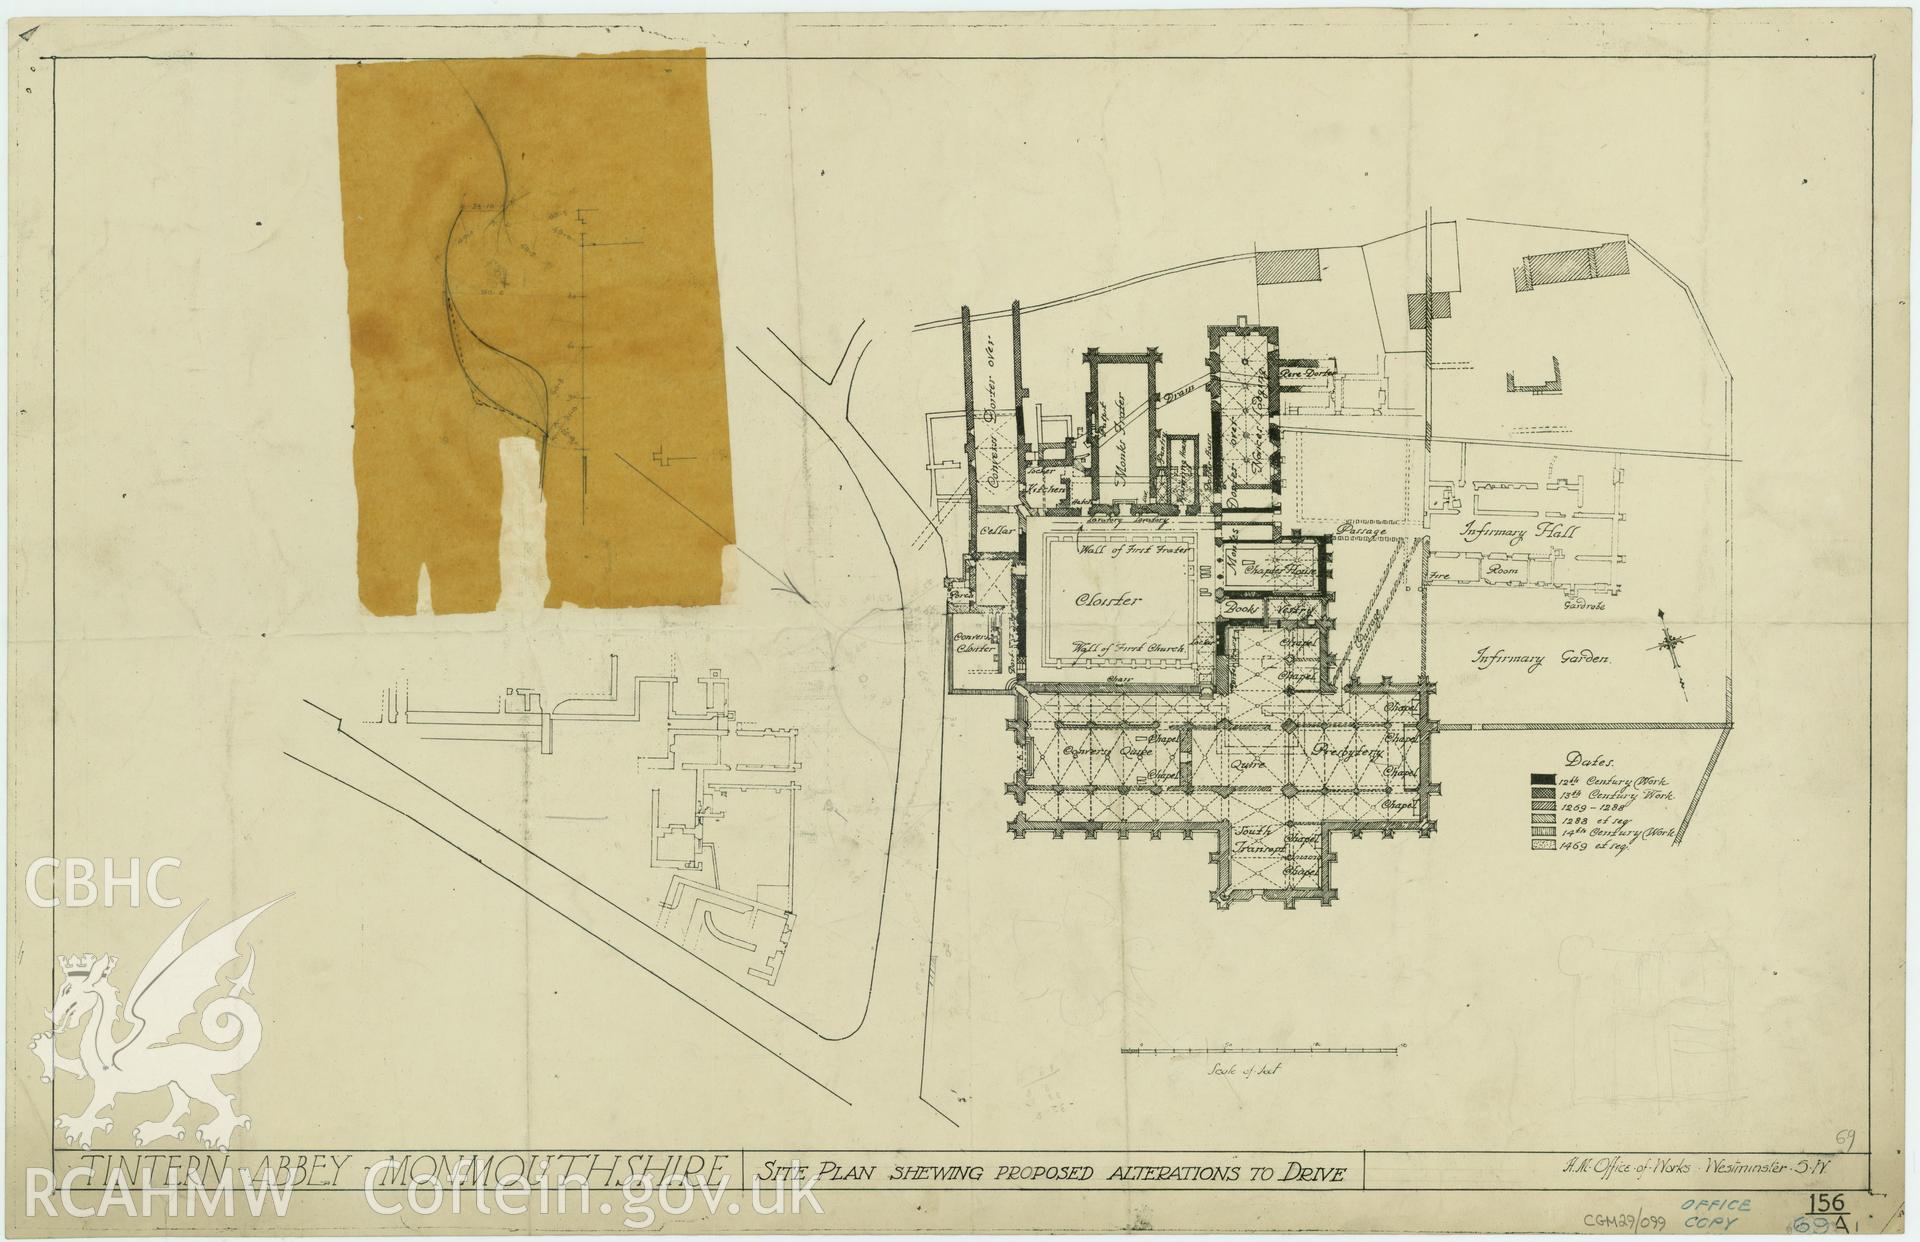 Digital copy of Cadw guardianship monument drawing of Tintern Abbey, plan of proposed alterations to drive, undated.